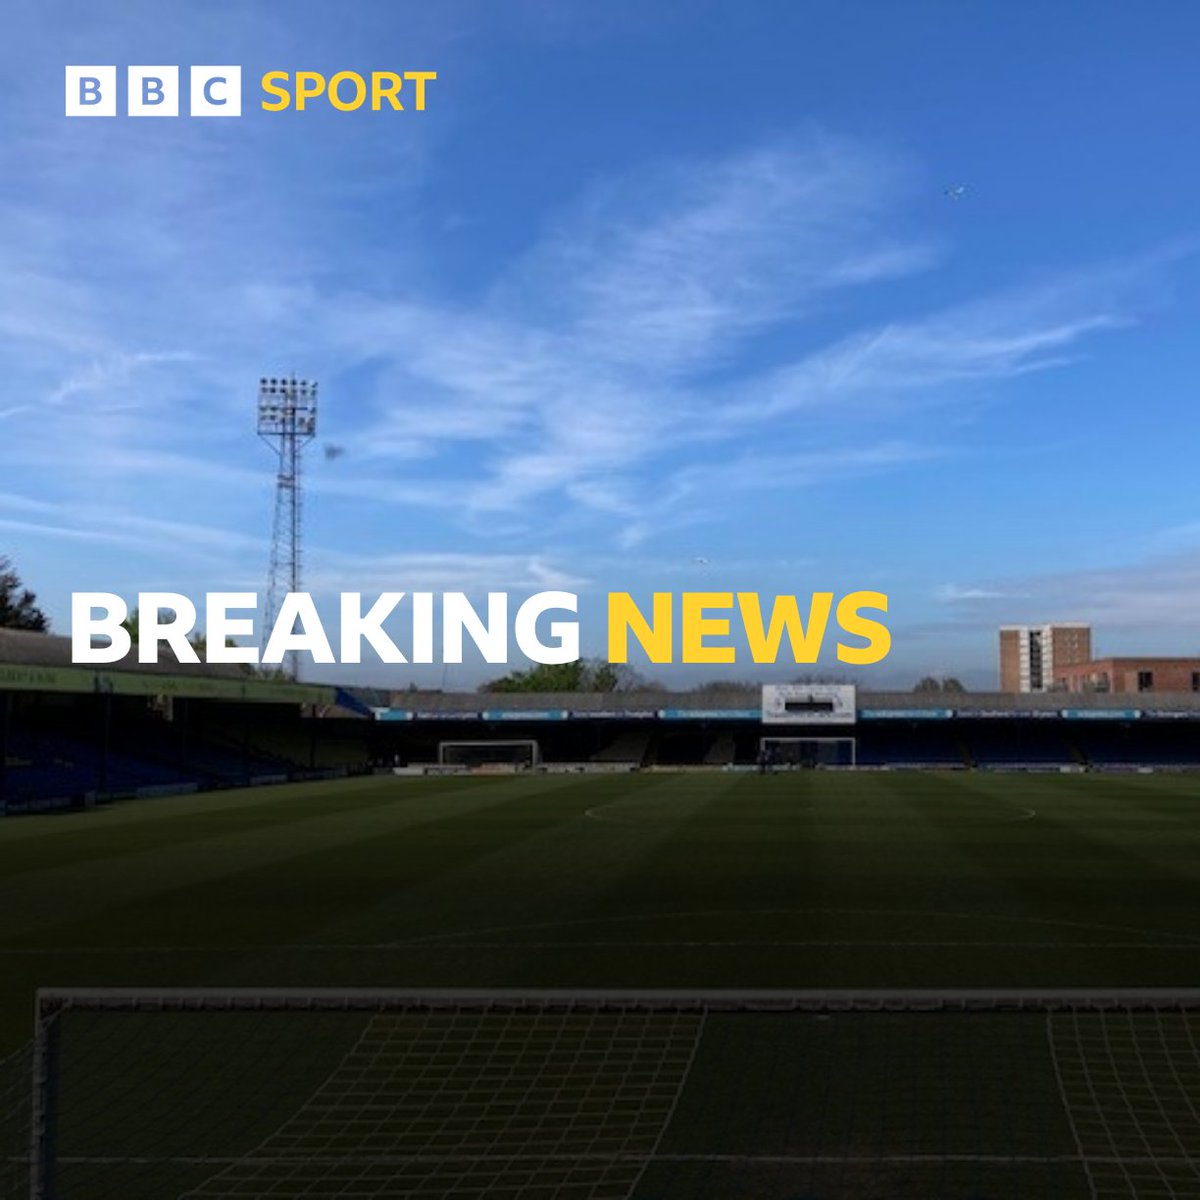 BREAKING: The Southend United winding up petition due to be heard on Wednesday is set to be adjourned. Stewarts Law has issued a statement to BBC Essex, saying they will support a 6 week adjournment requested by club chairman Ron Martin. #Southend